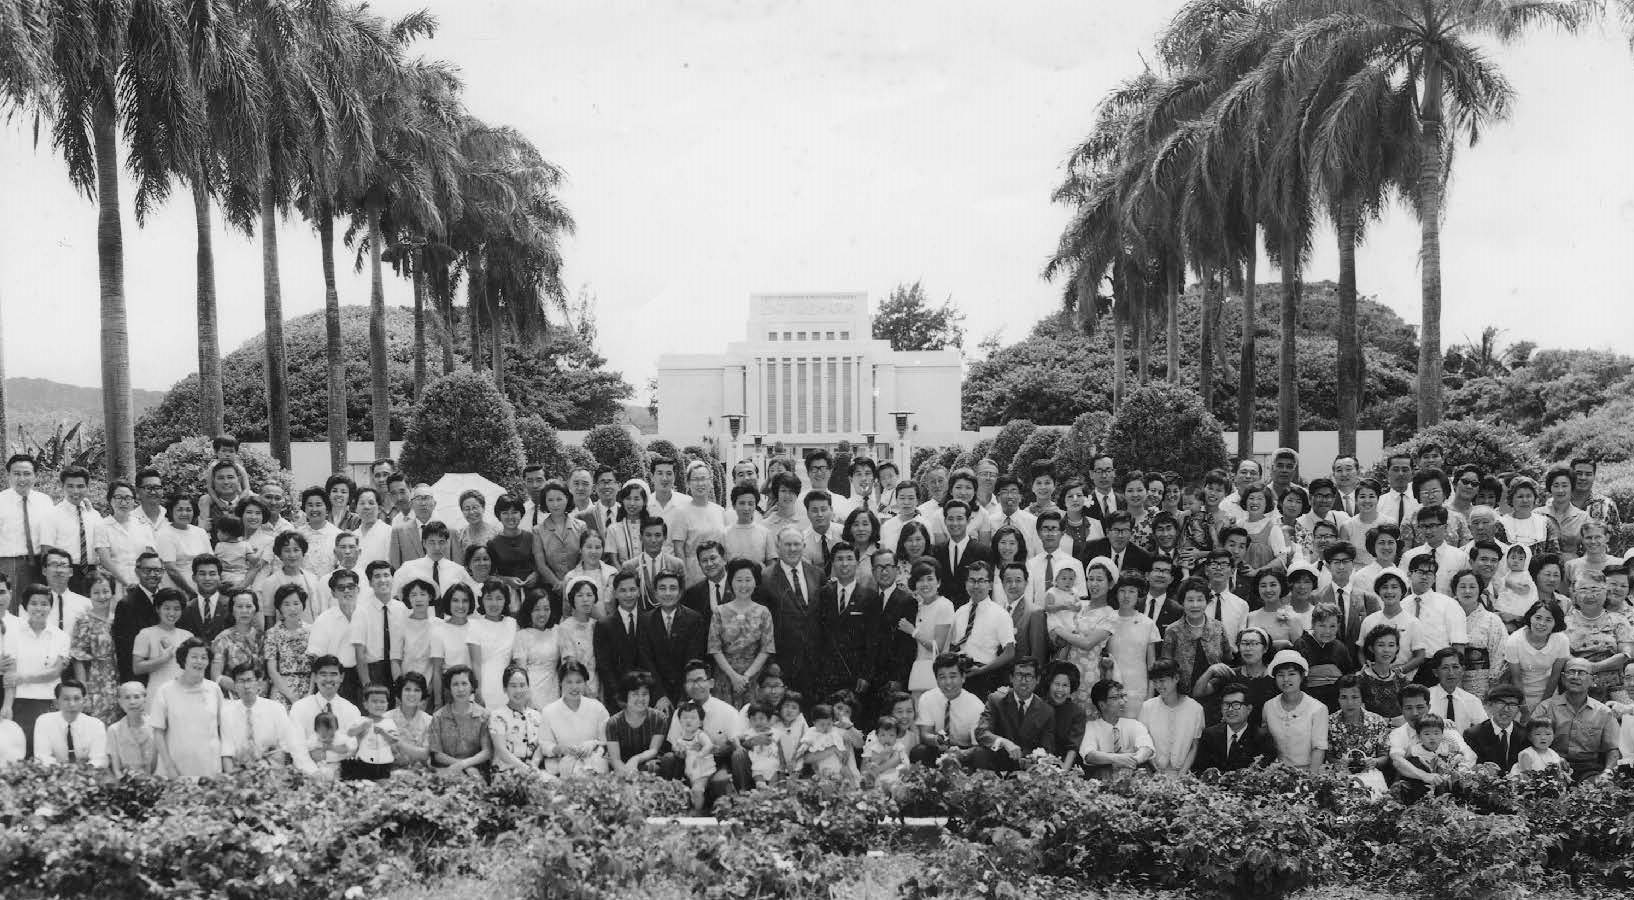 Starting in 1965, Japanese excursions to the Hawaii Temple continued almost yearly through 1979, concluding with the dedication of the Tokyo Temple in 1980. Pictured here is the 1967 Japanese excursion group. Courtesy of Masahisa Watabe and BYU–Hawaii Archives.